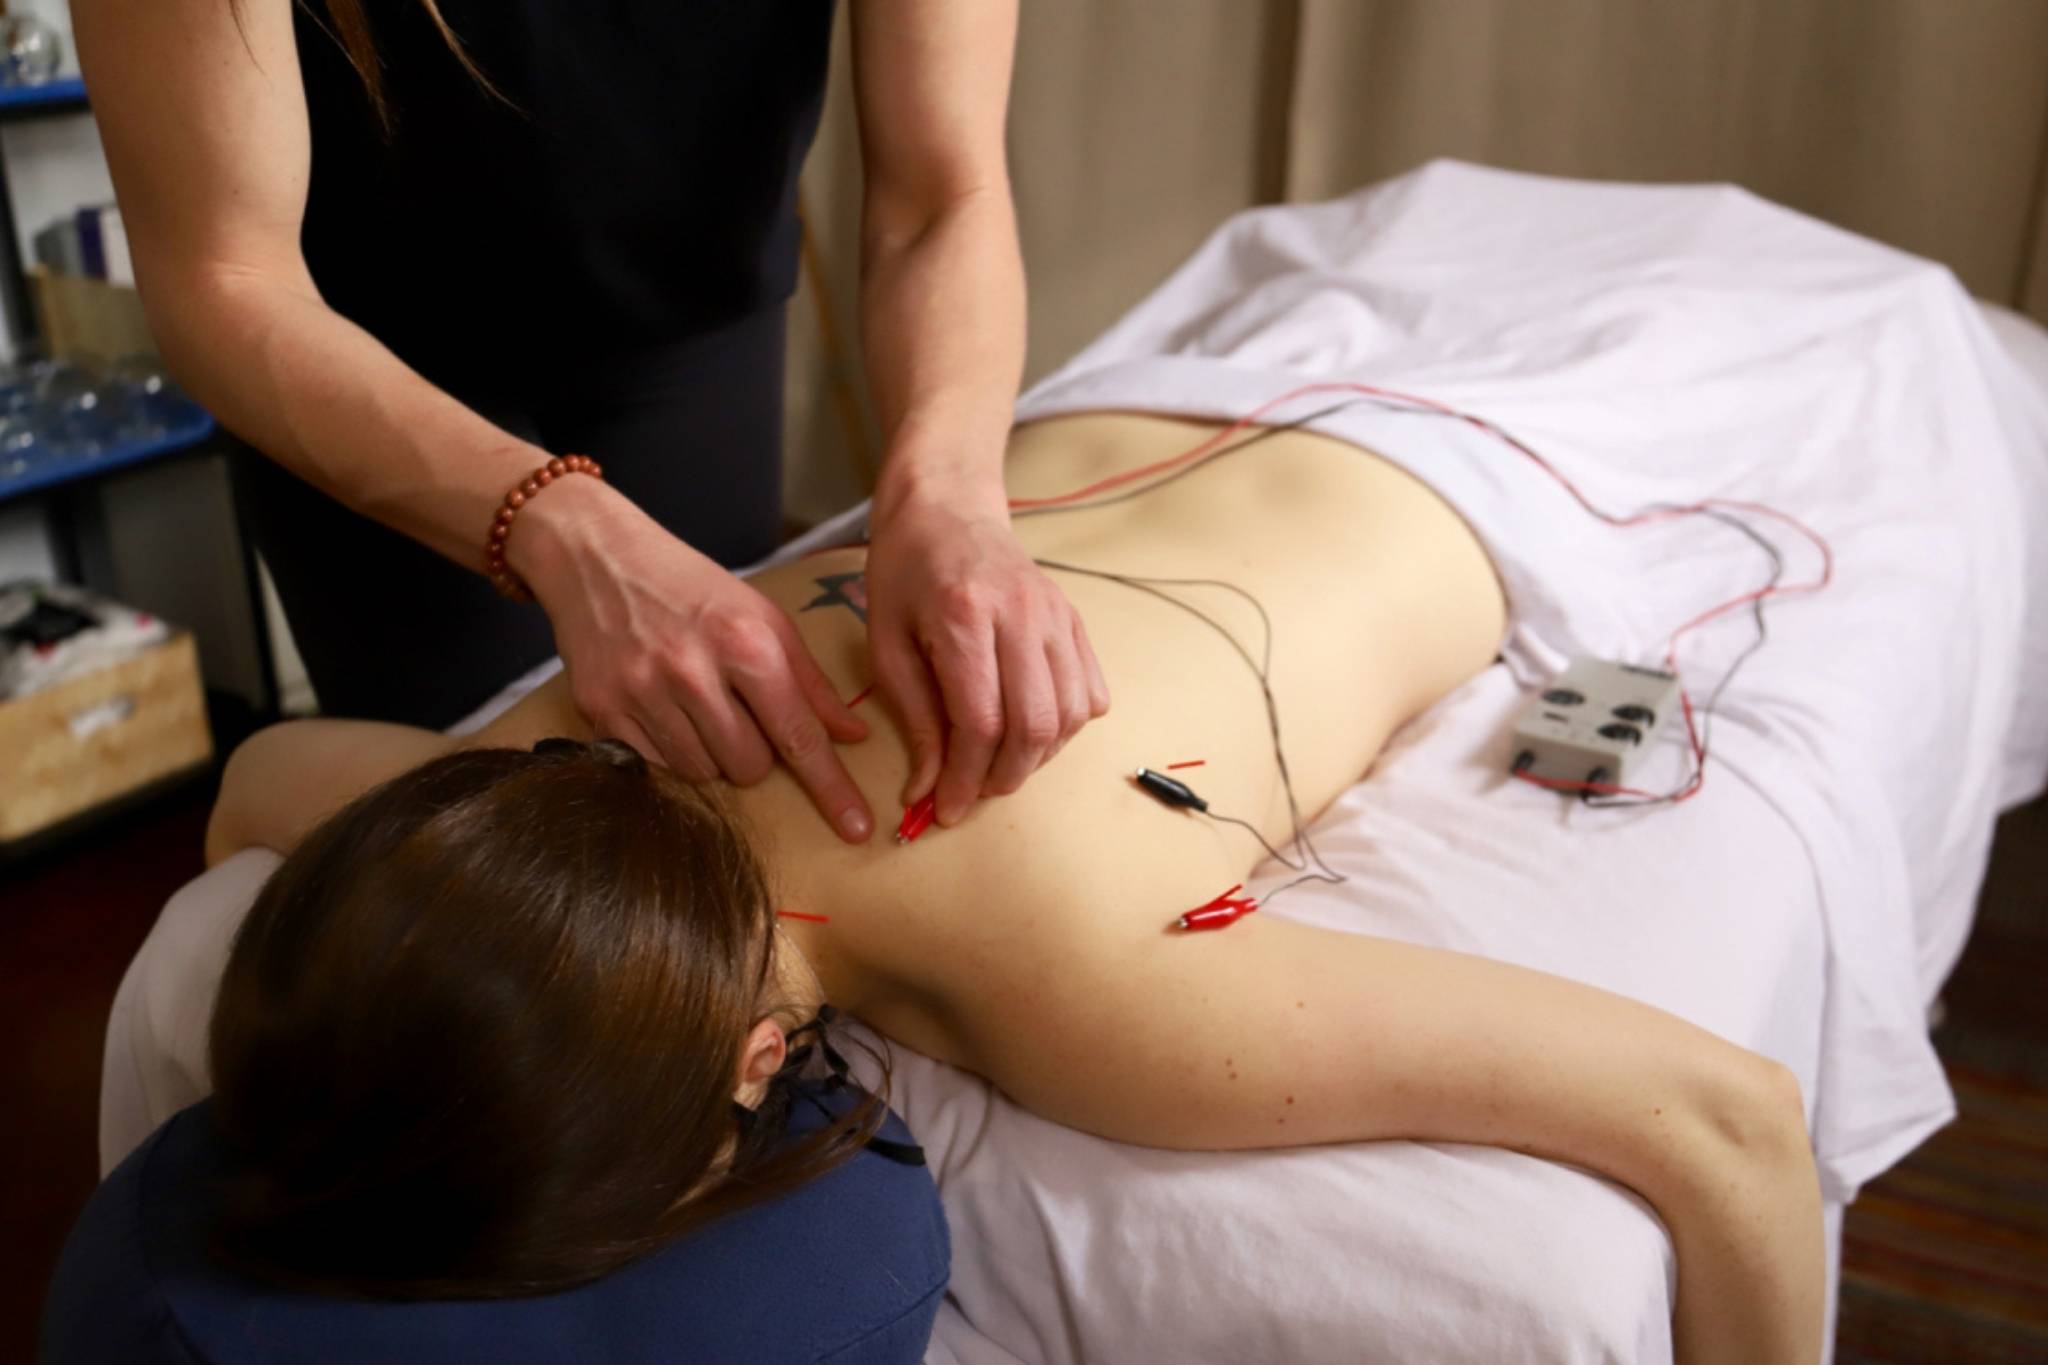 girl getting dry needling in back with e-stim